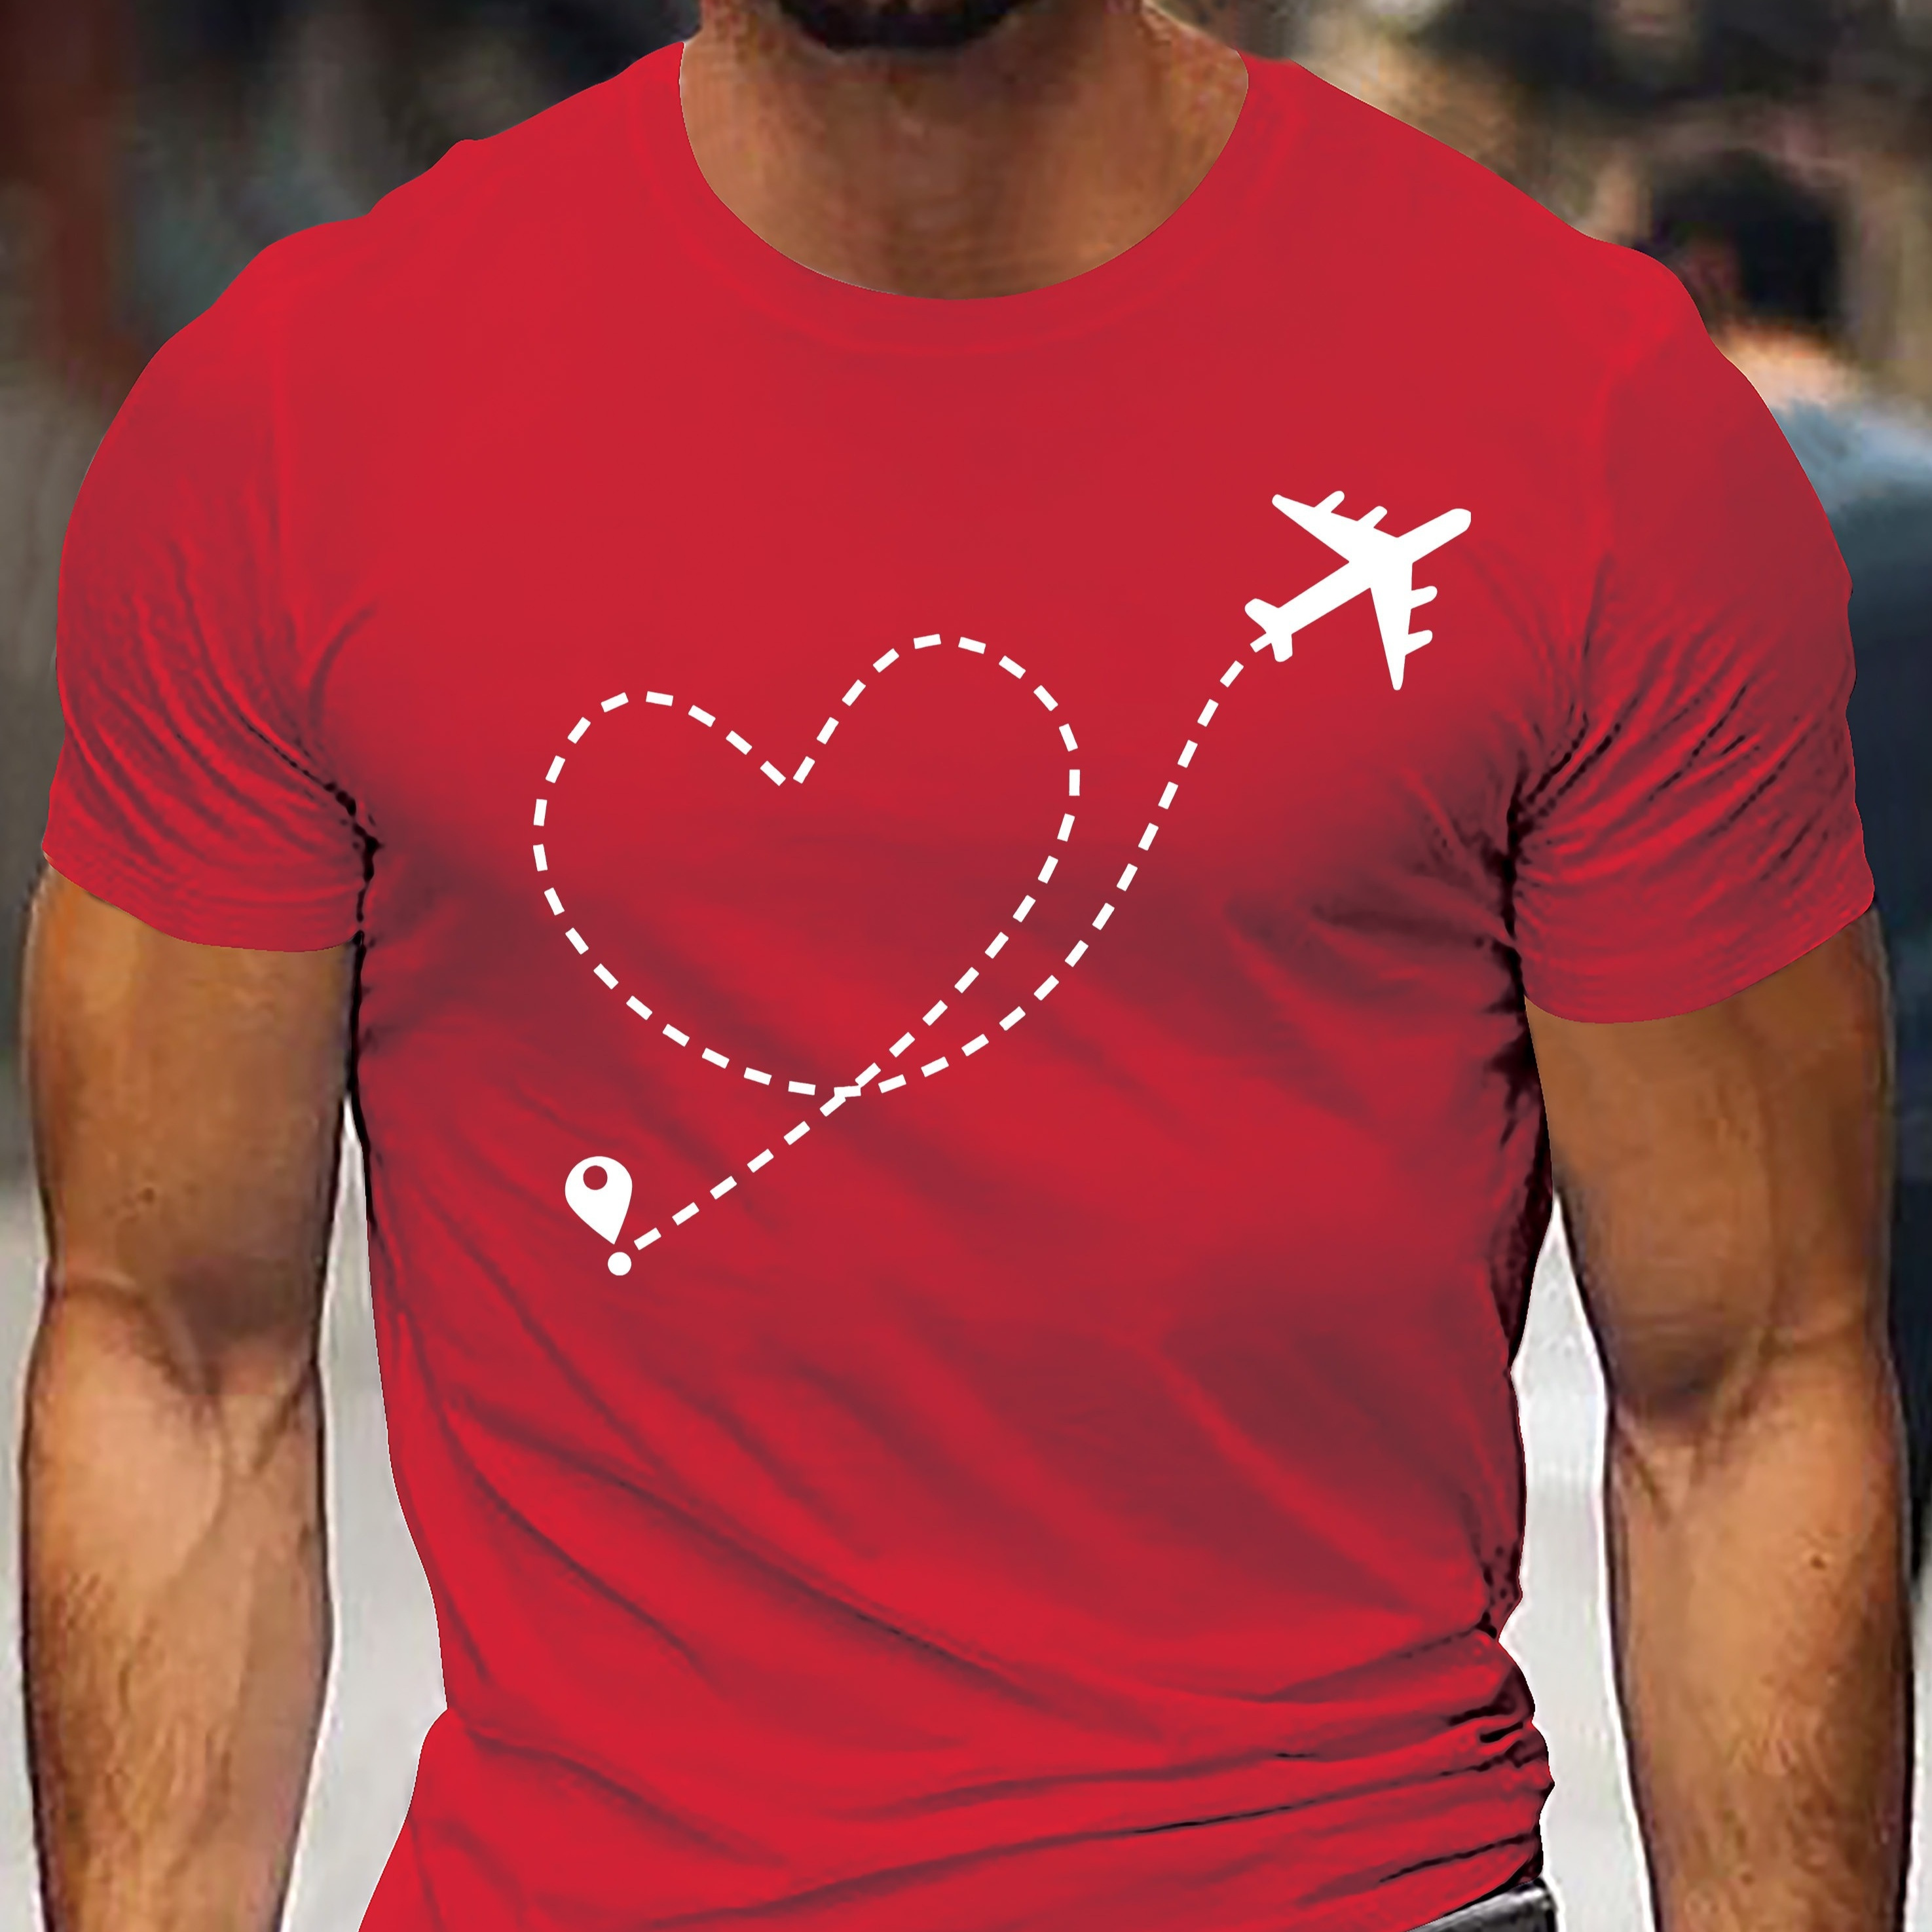 

Airplane Graphic Men's Short Sleeve T-shirt, Comfy Stretchy Trendy Tees For Summer, Casual Daily Style Fashion Clothing